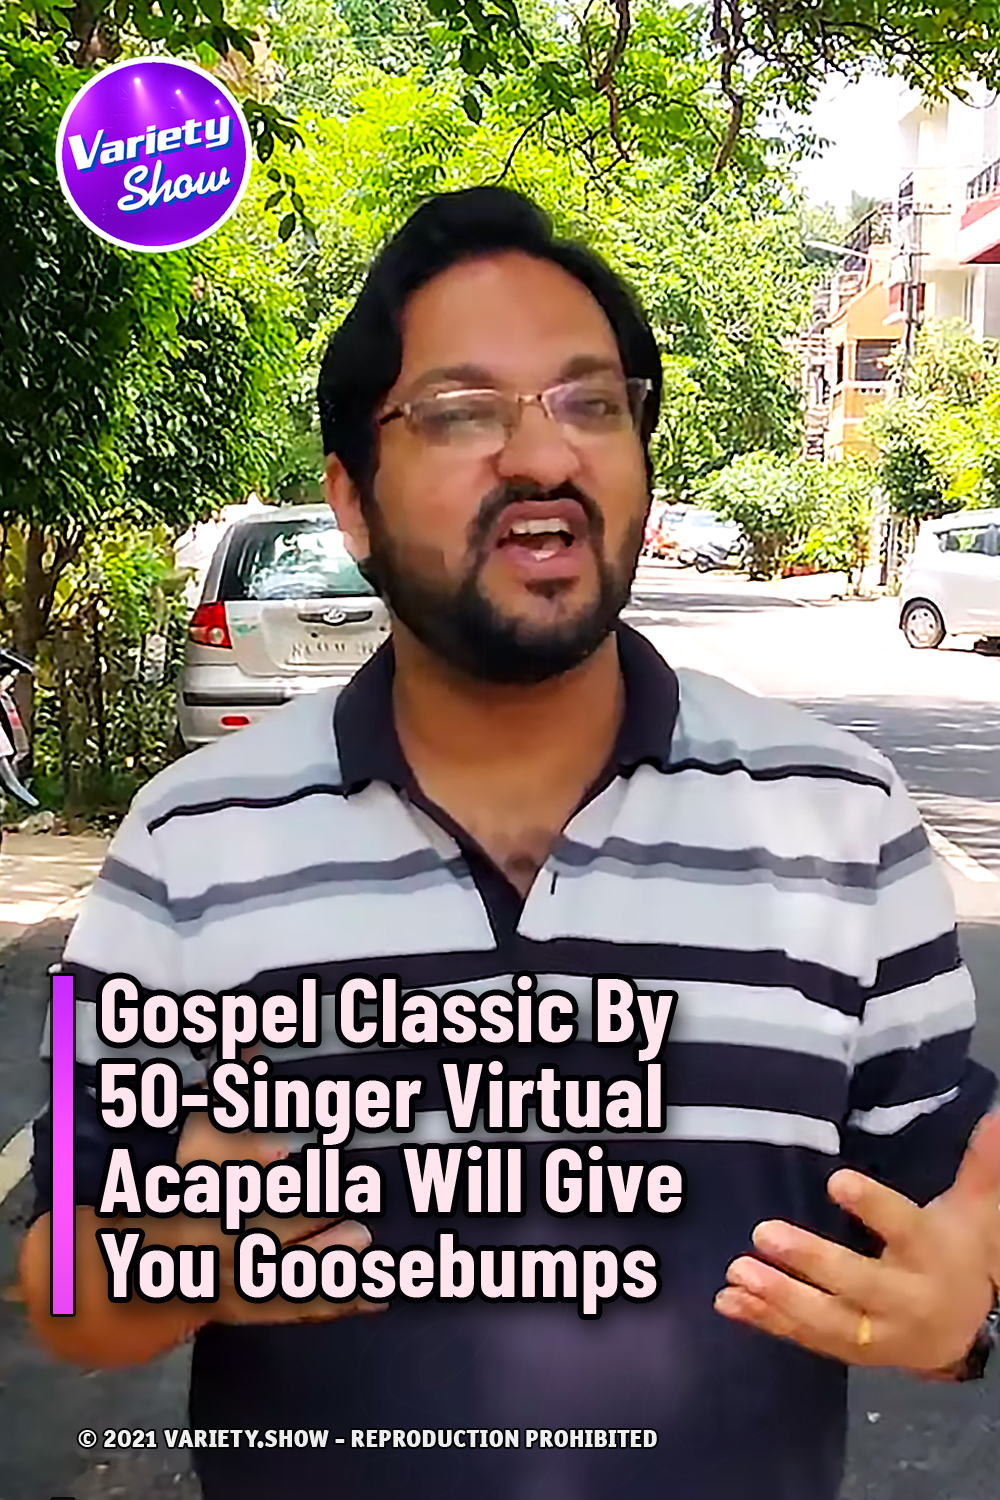 Gospel Classic By 50-Singer Virtual Acapella Will Give You Goosebumps